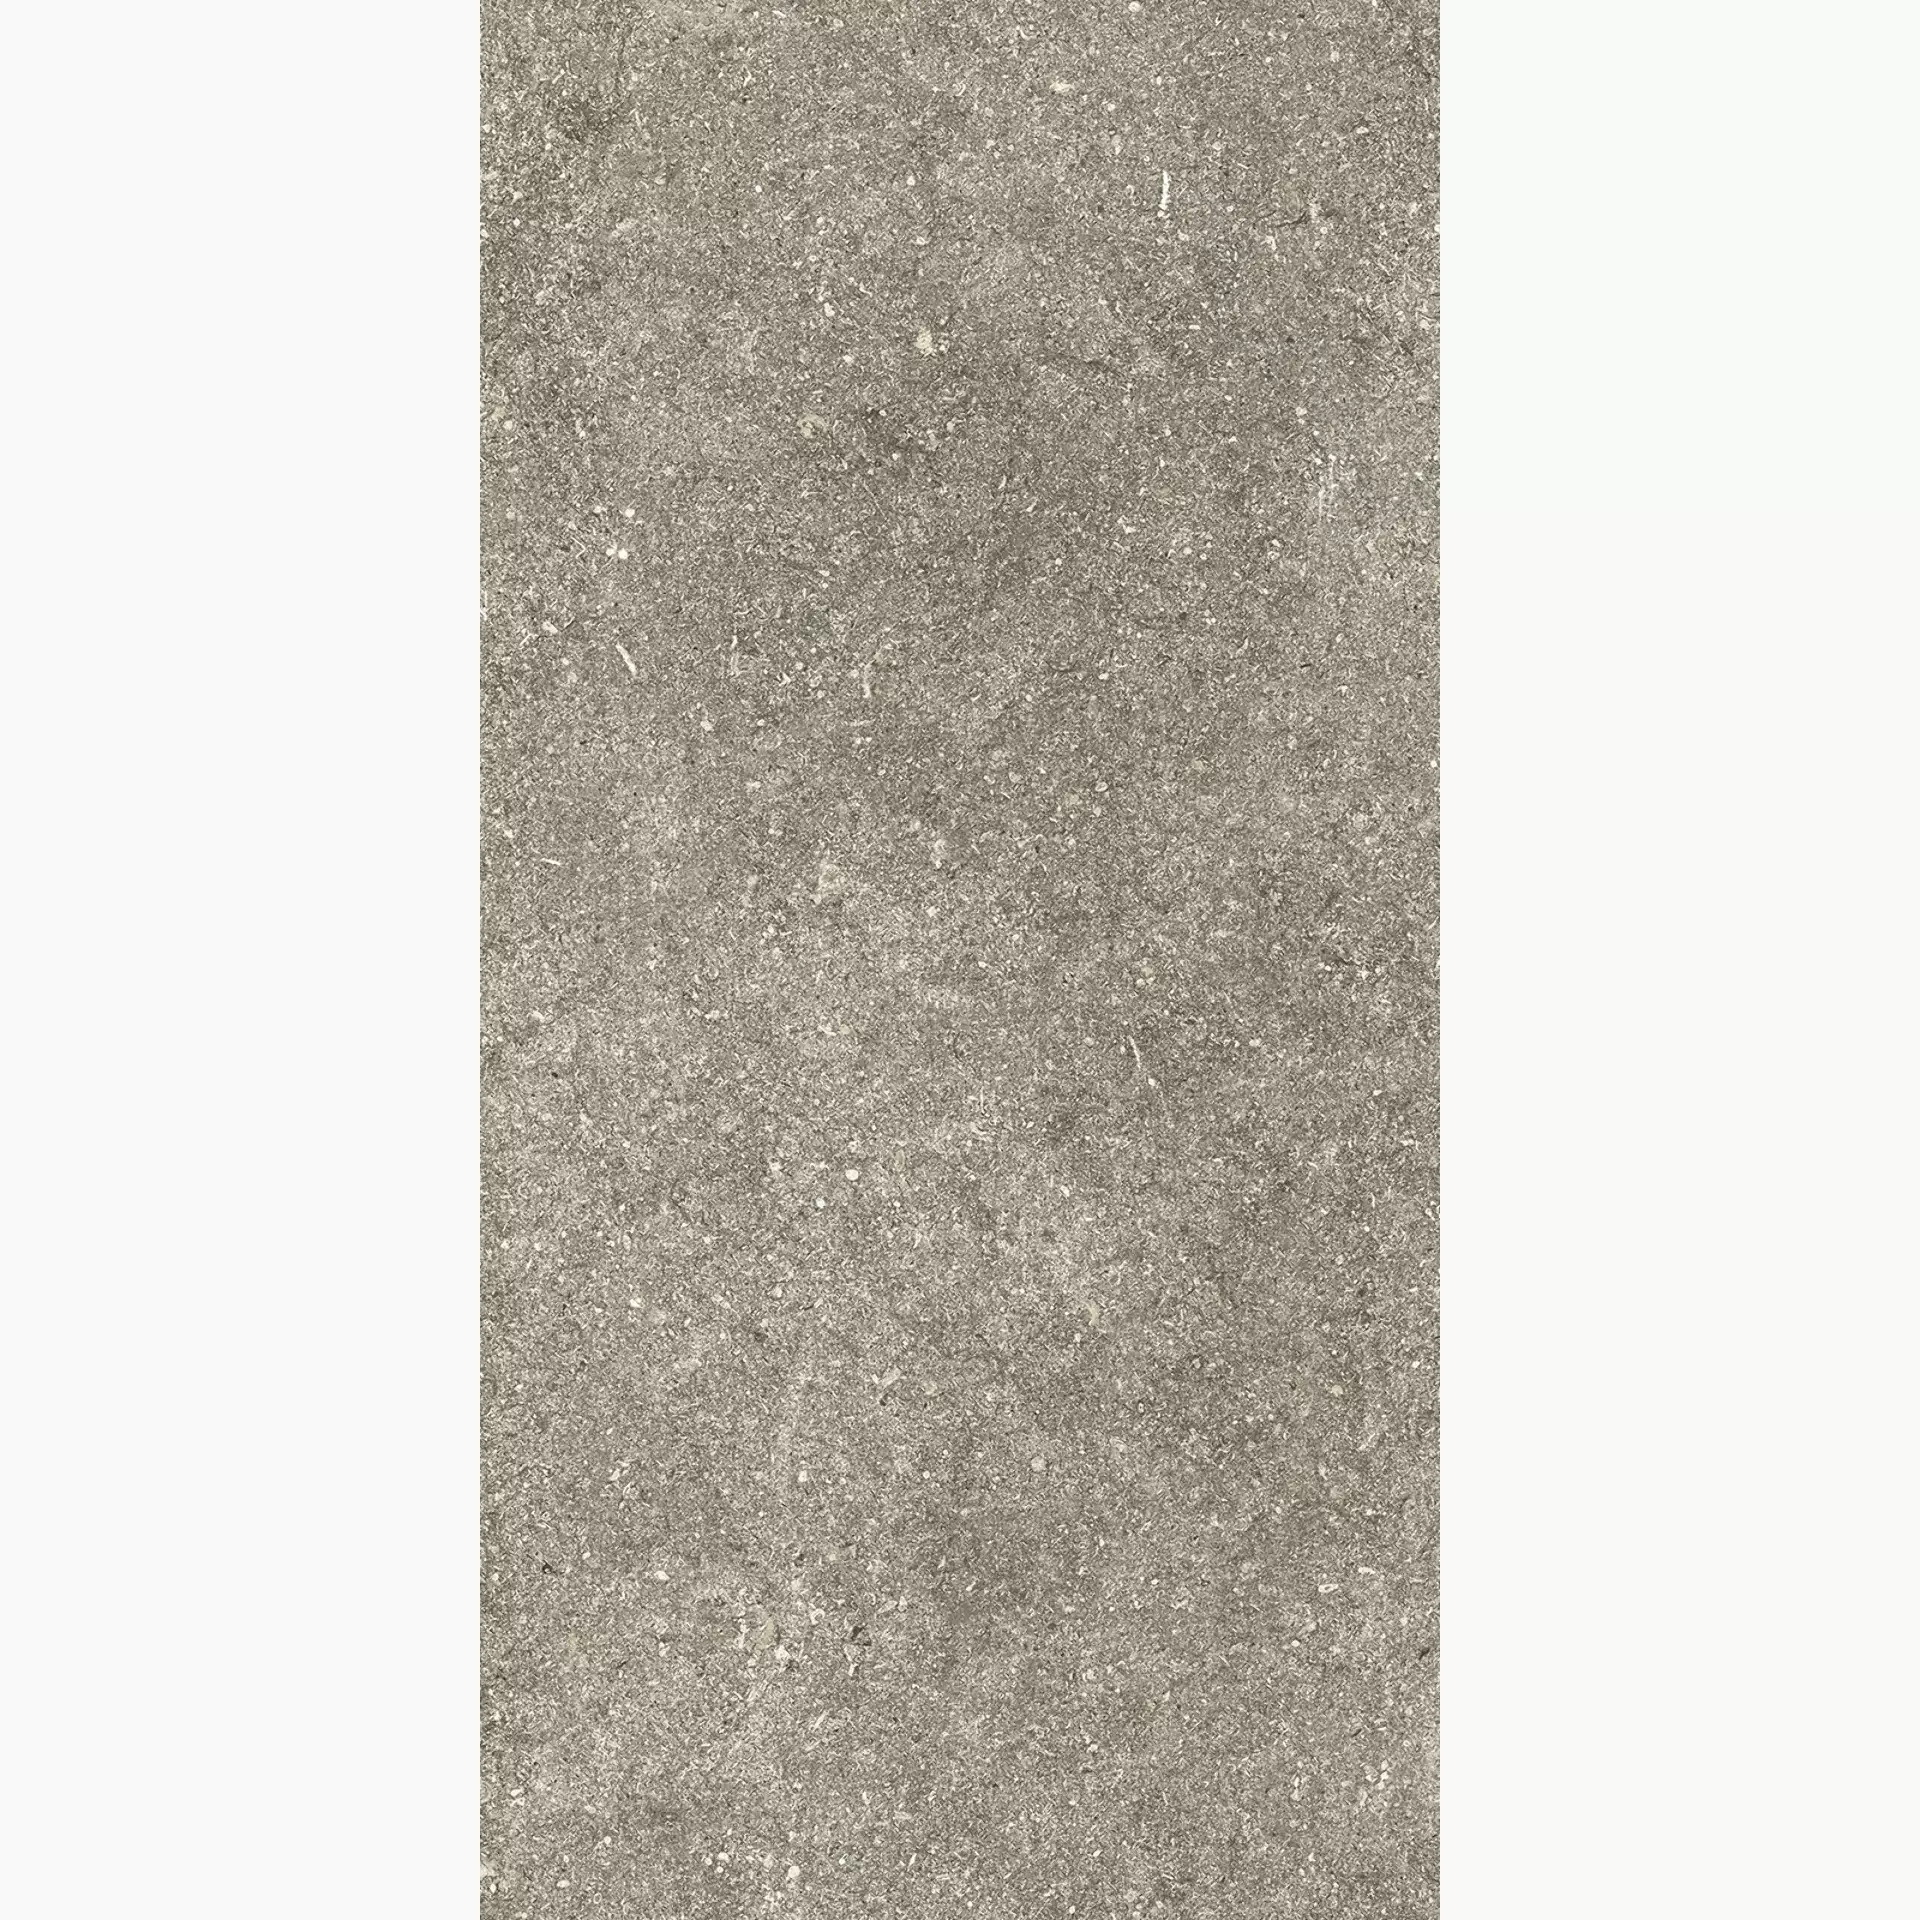 KRONOS Le Reverse Taupe Elegance Lappato RS068 40x80cm rectified 9mm